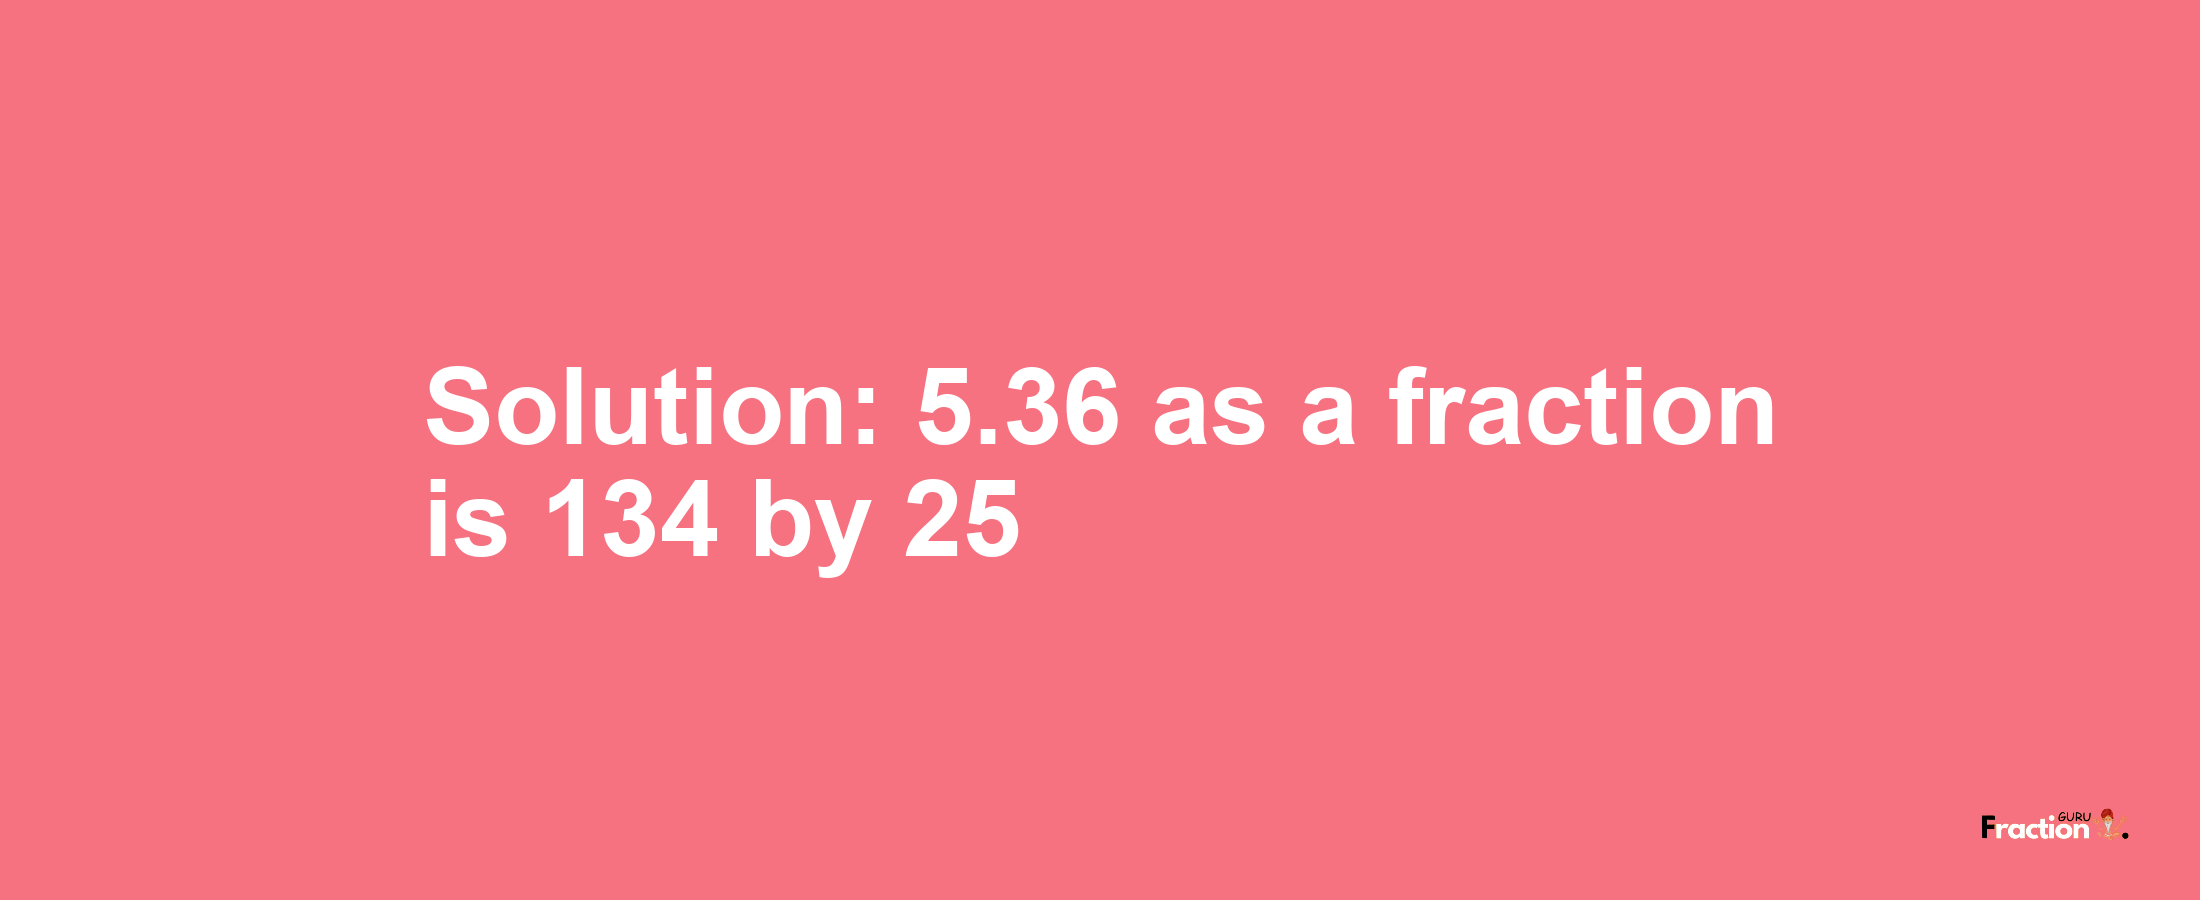 Solution:5.36 as a fraction is 134/25